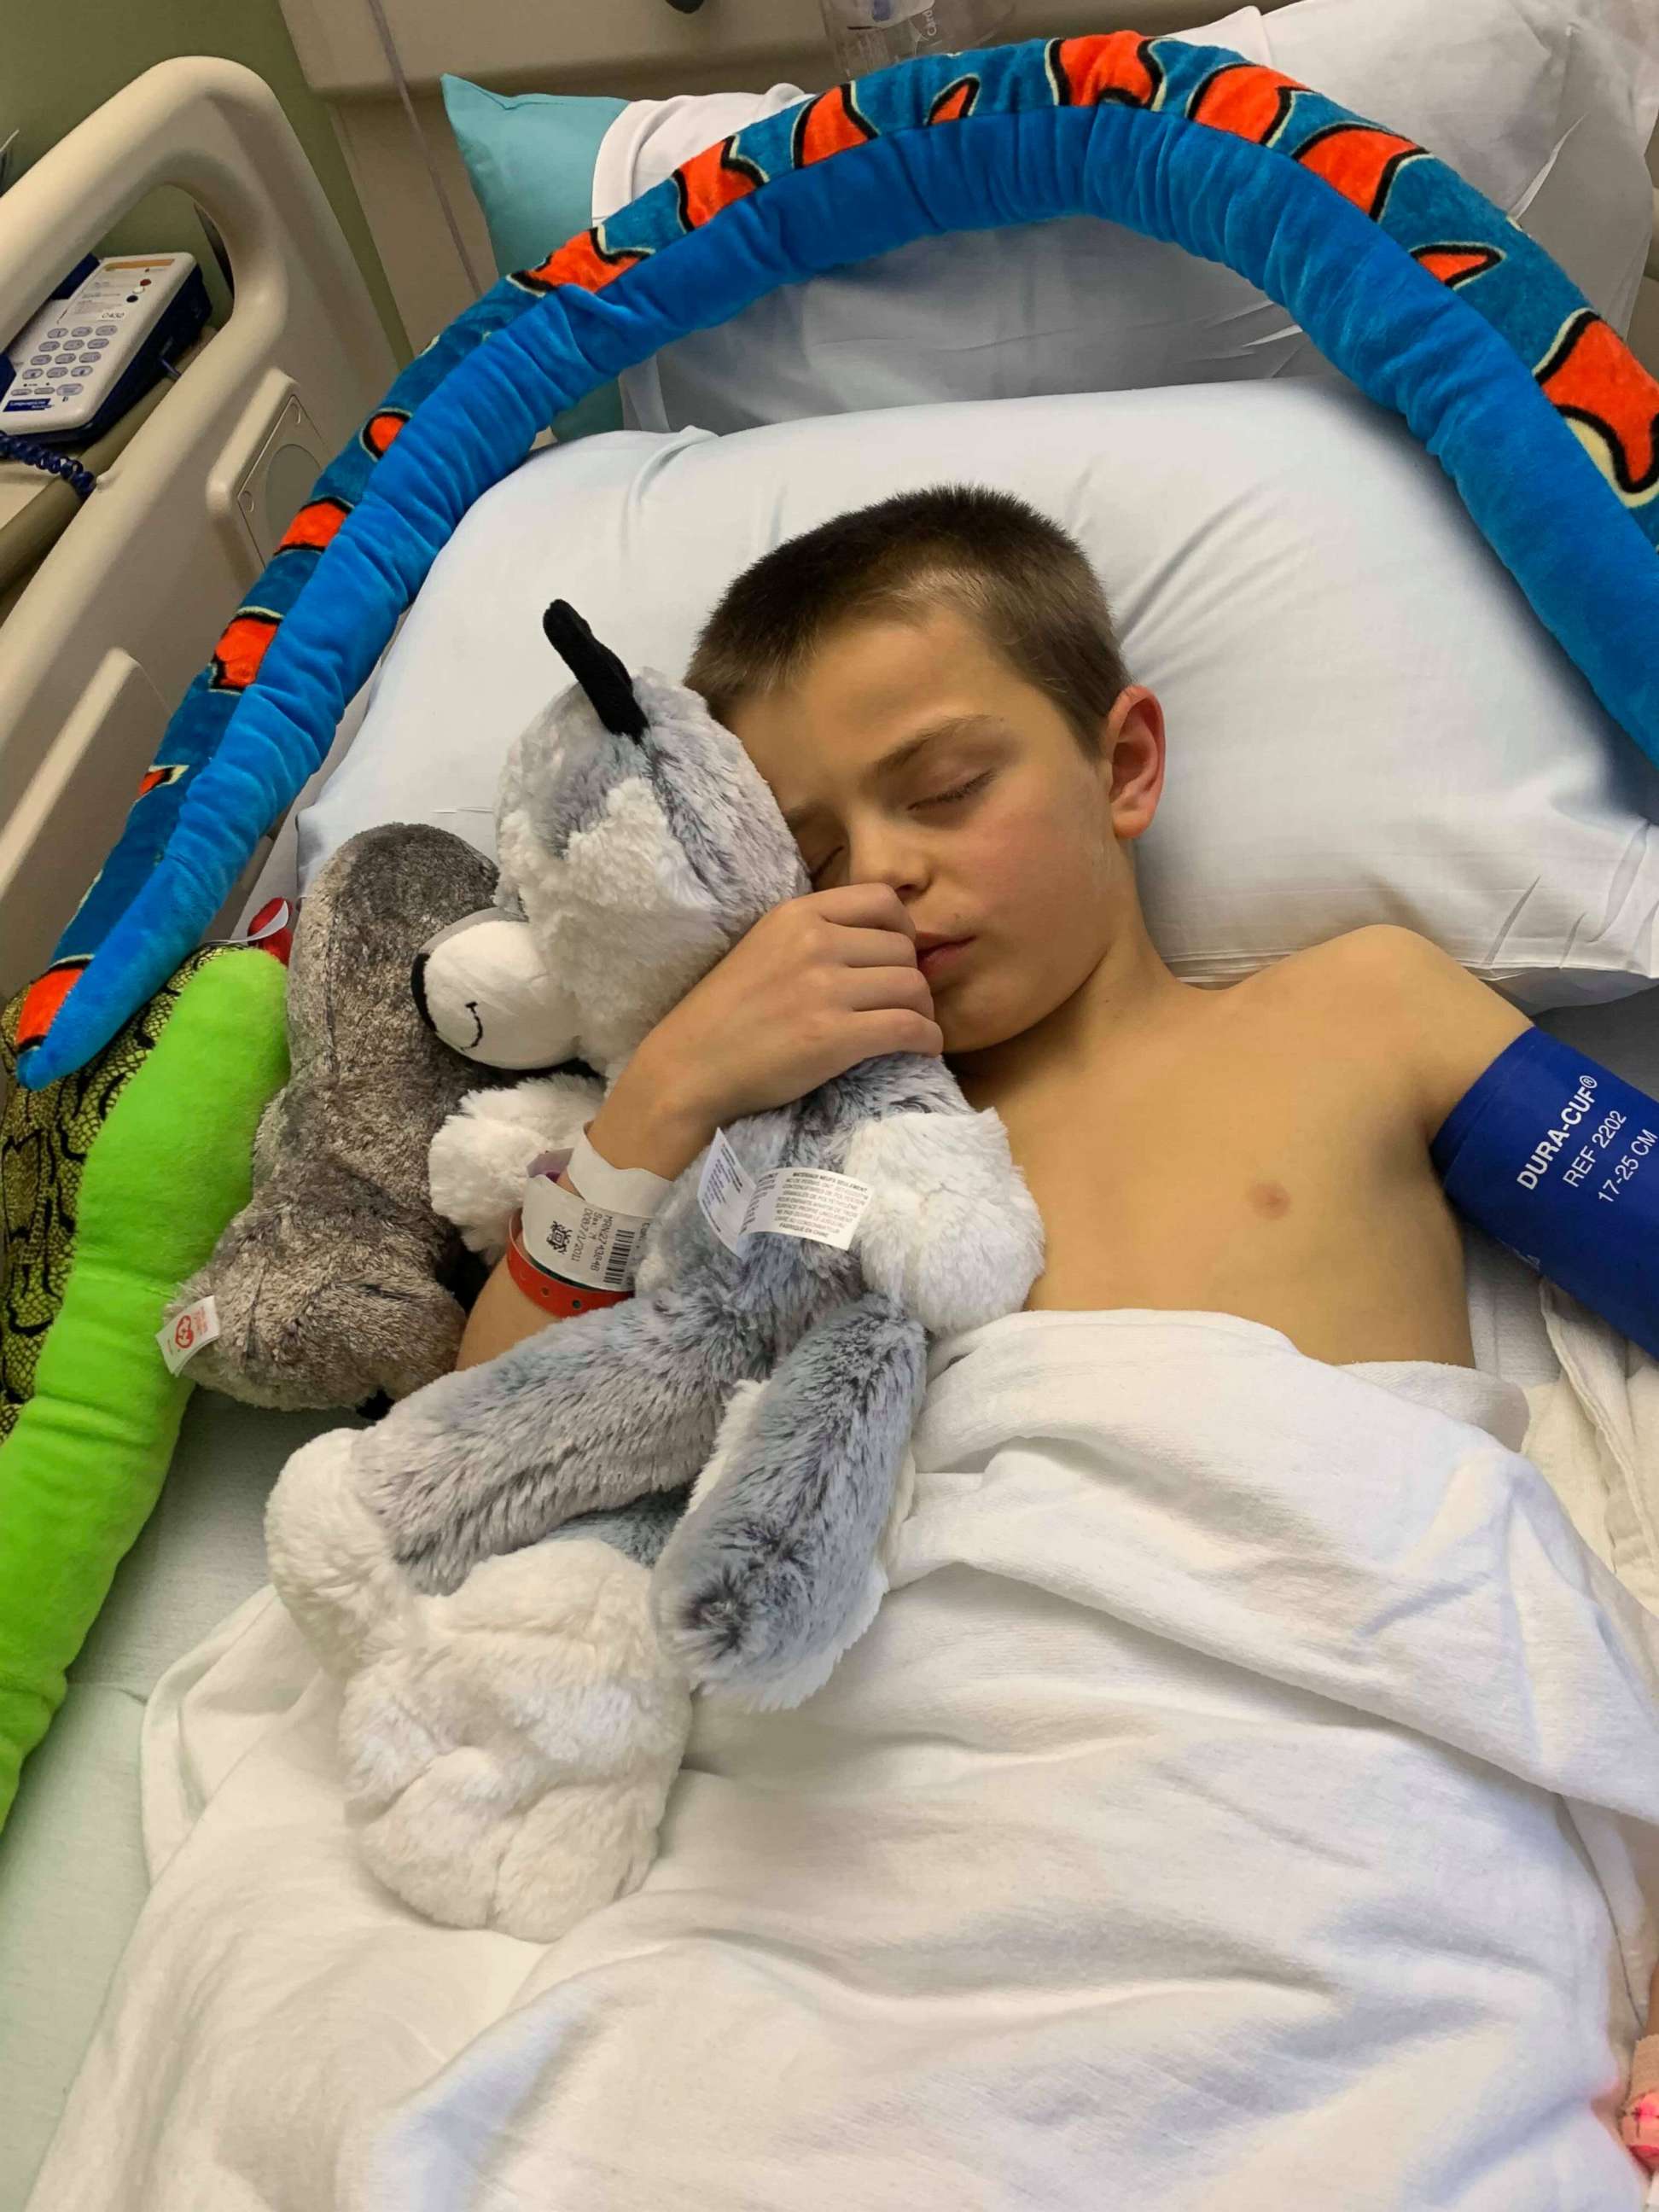 PHOTO: Brayden Auten, 8, of Wrightstown, Wisconsin, learned he needed a liver transplant in April after he got sick quickly and was admitted to Children's Hospital of Milwaukee.